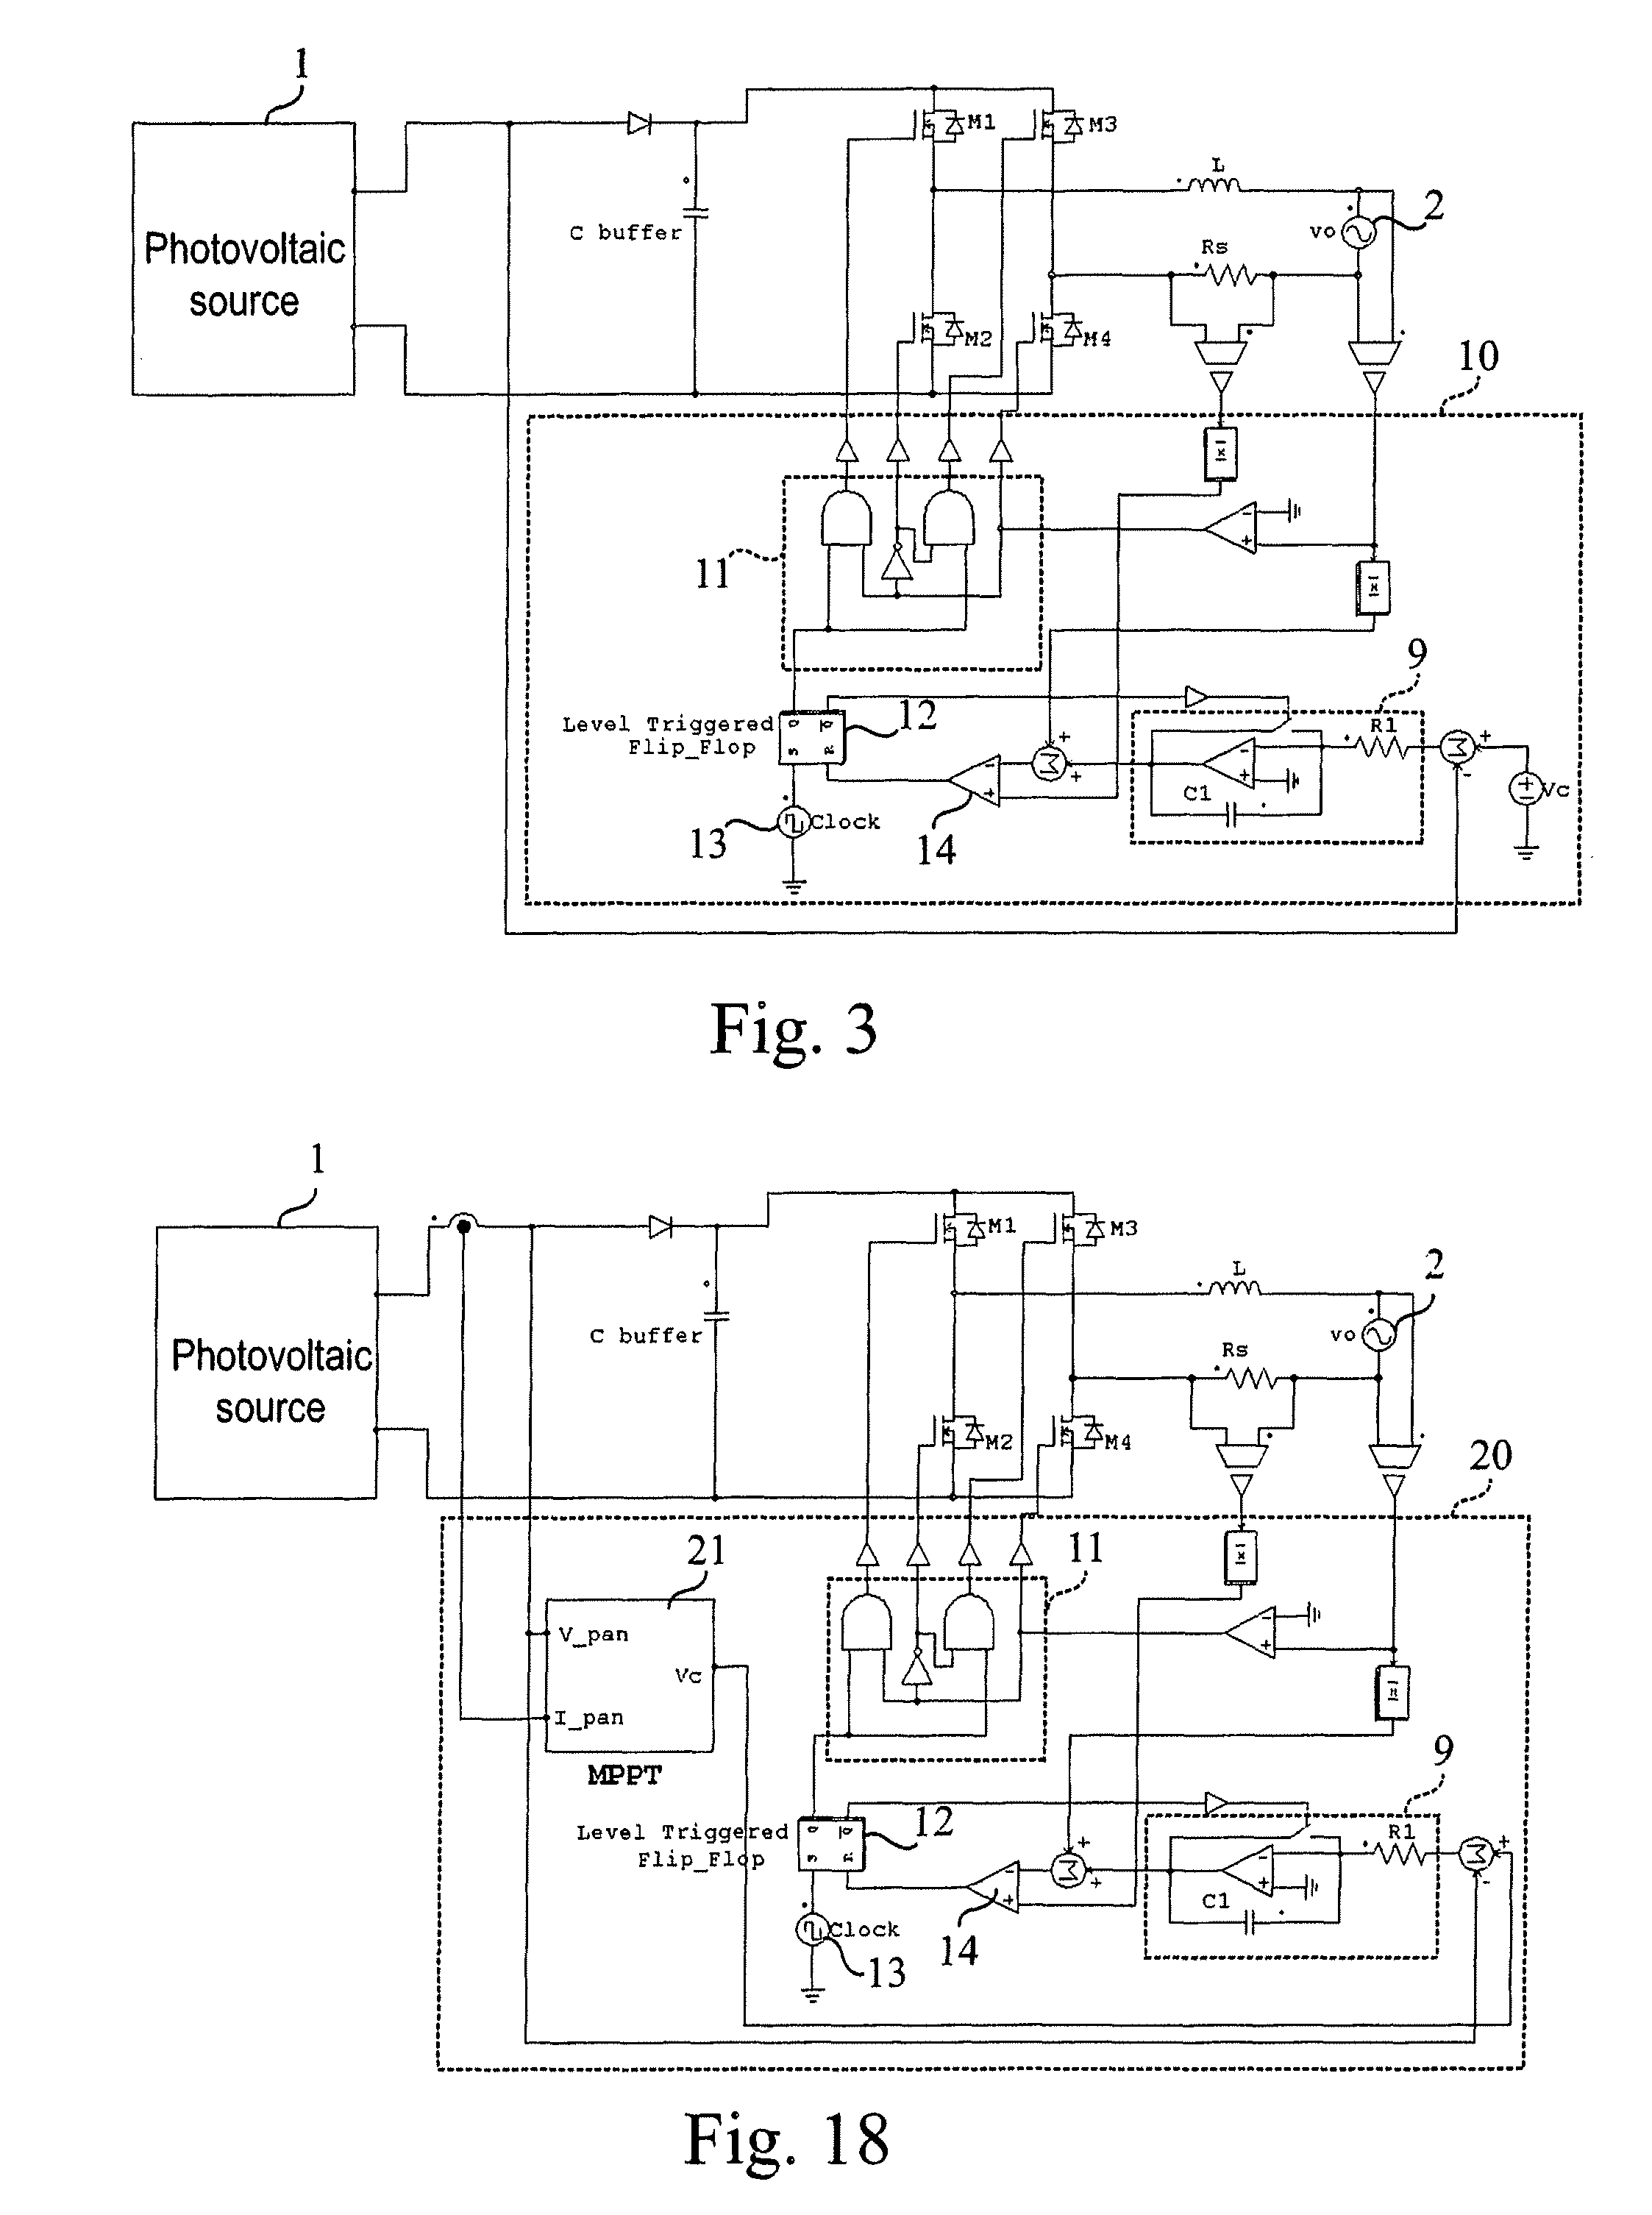 Single stage inverter device, and related controlling method, for converters of power from energy sources, in particular photovoltaic sources